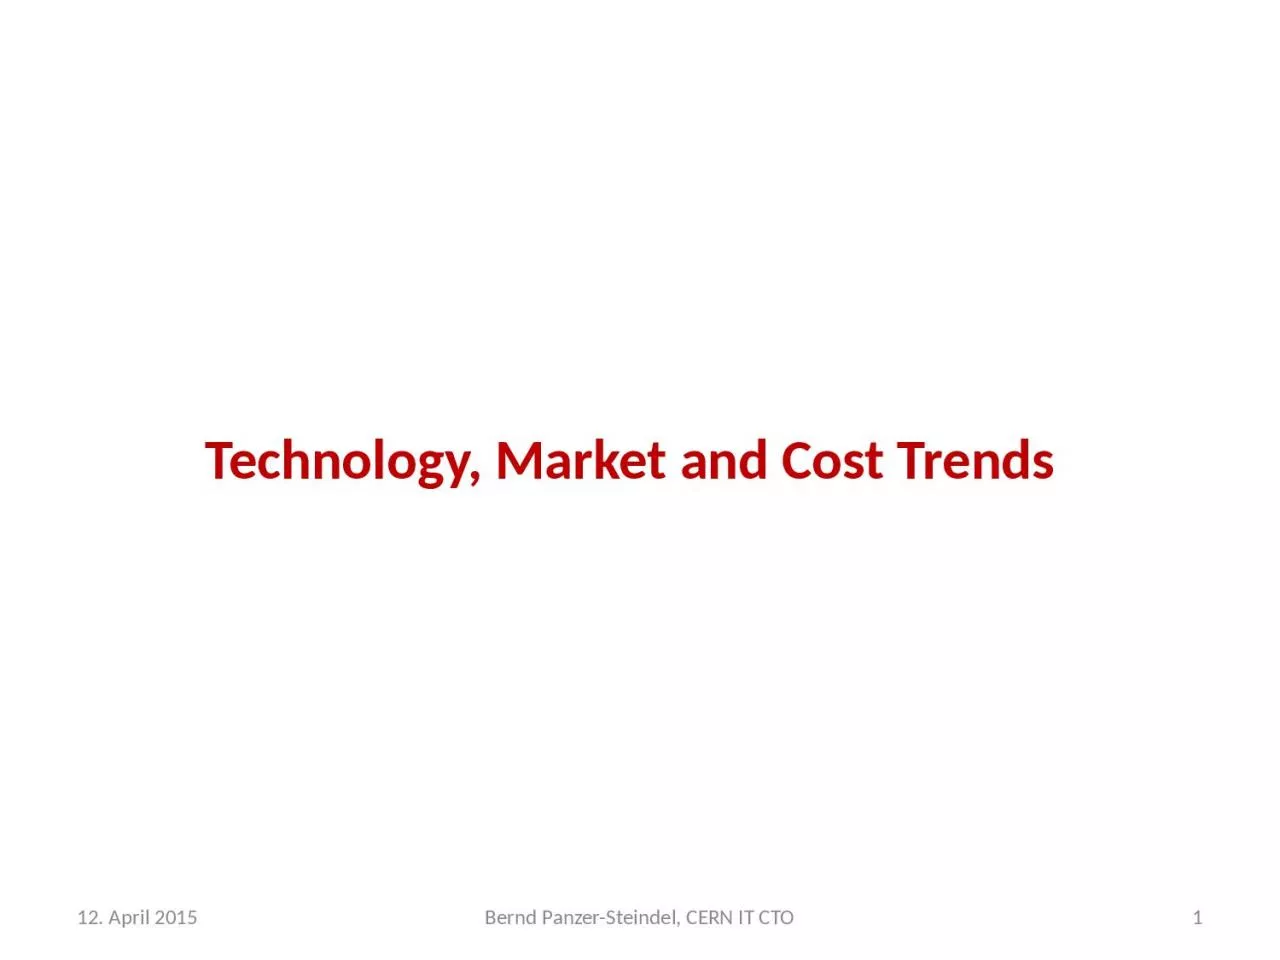 Technology, Market and Cost Trends